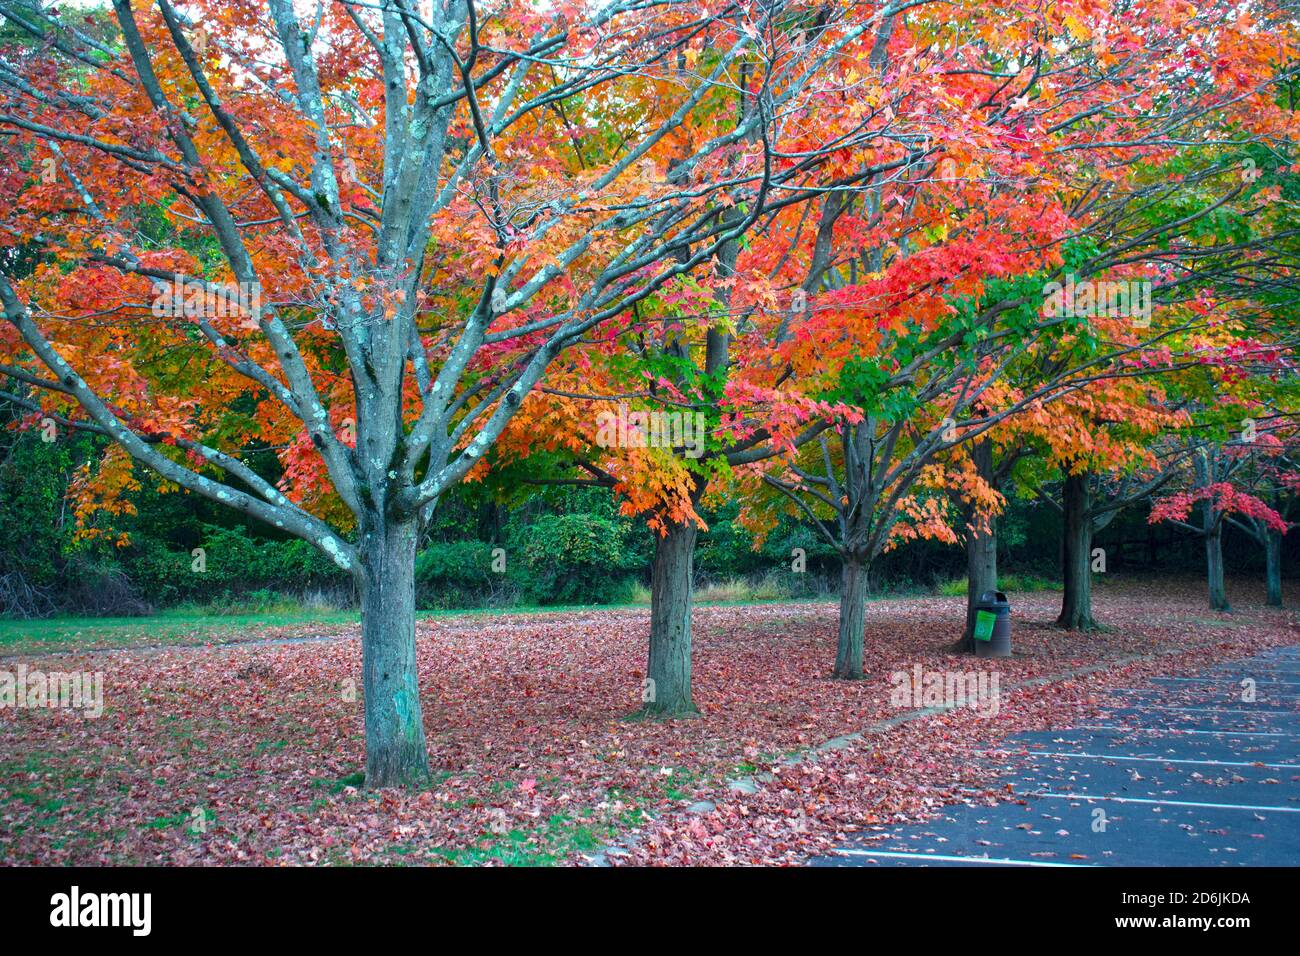 Maple tree leaves changing into spectacular colors and also dropping to the ground due to the cooler weather of the autumn days -01 Stock Photo